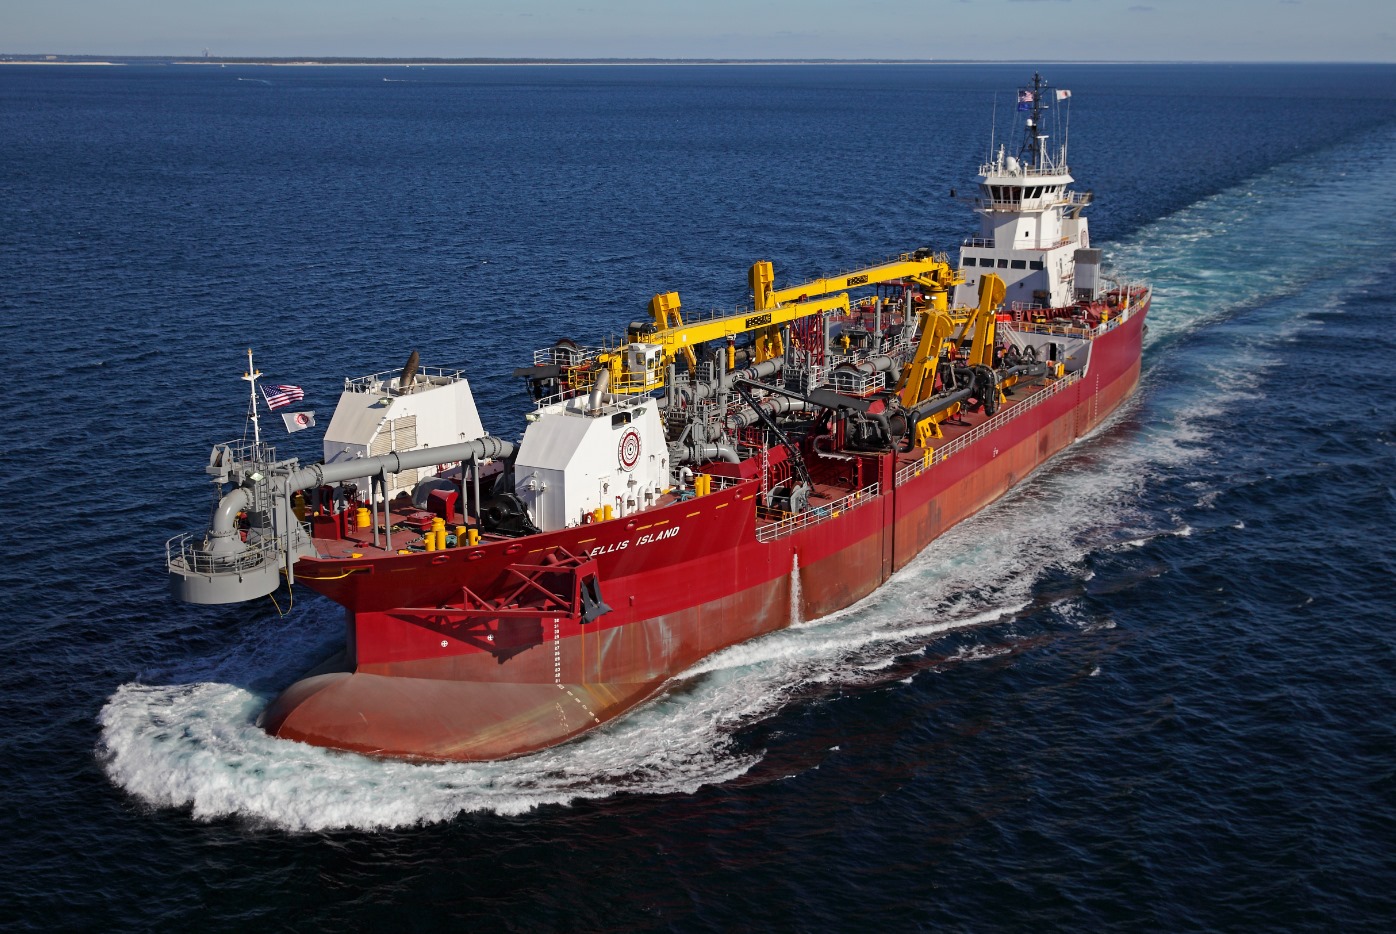 Great Lakes Announces the Signing of a Subcontract with Bechtel for Sabine Pass LNG Third Marine Berth Dredging Work